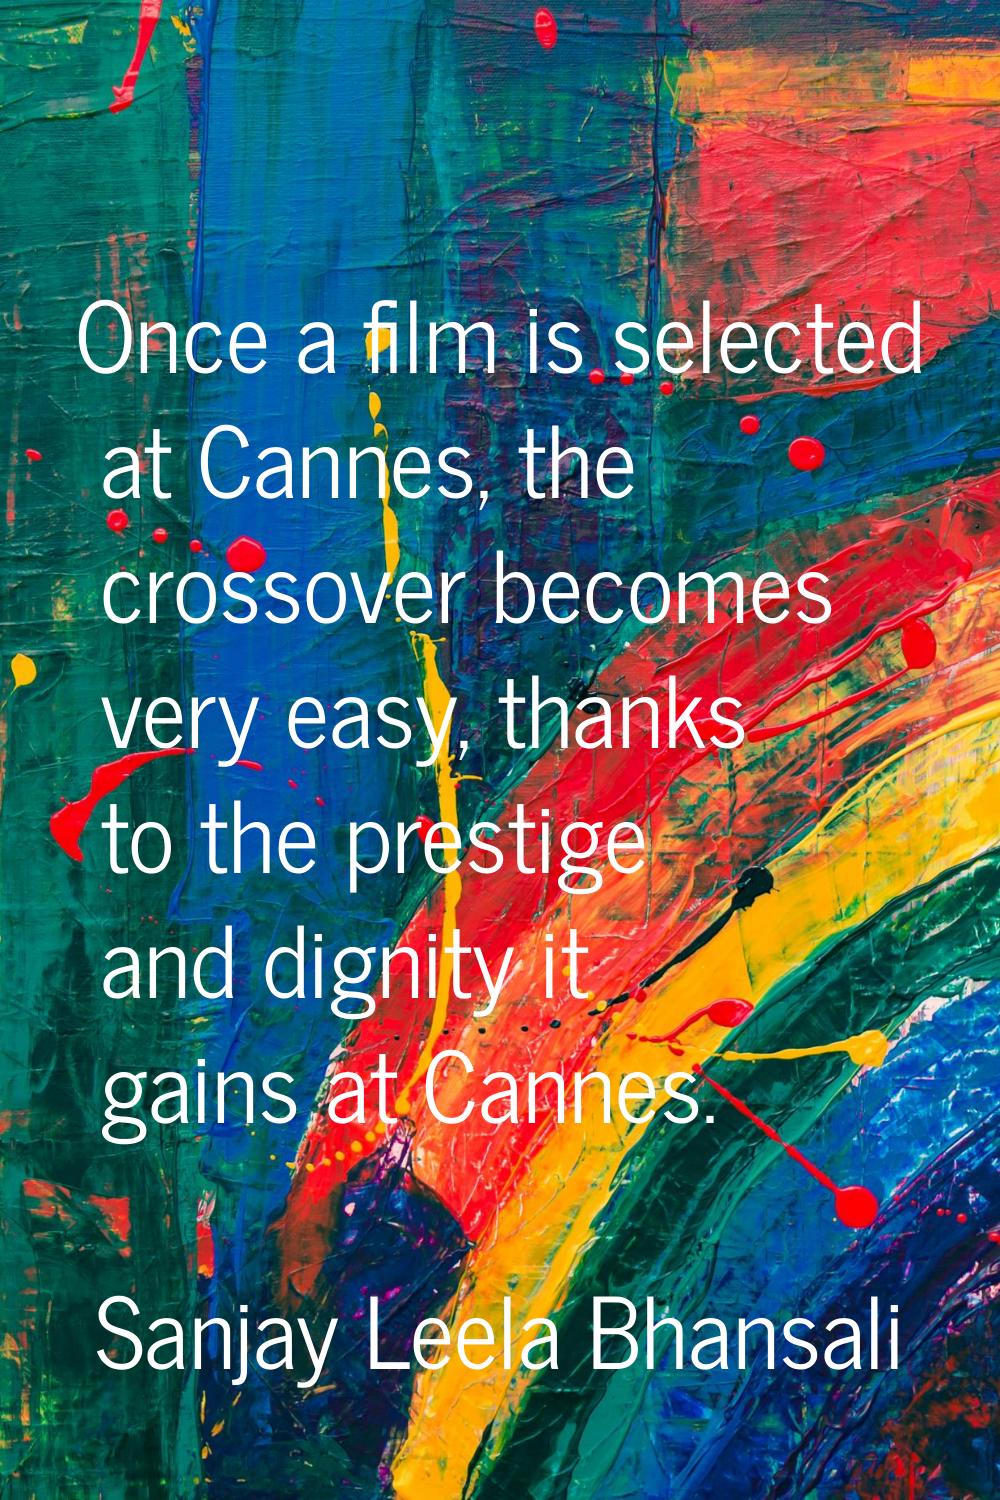 Once a film is selected at Cannes, the crossover becomes very easy, thanks to the prestige and dign